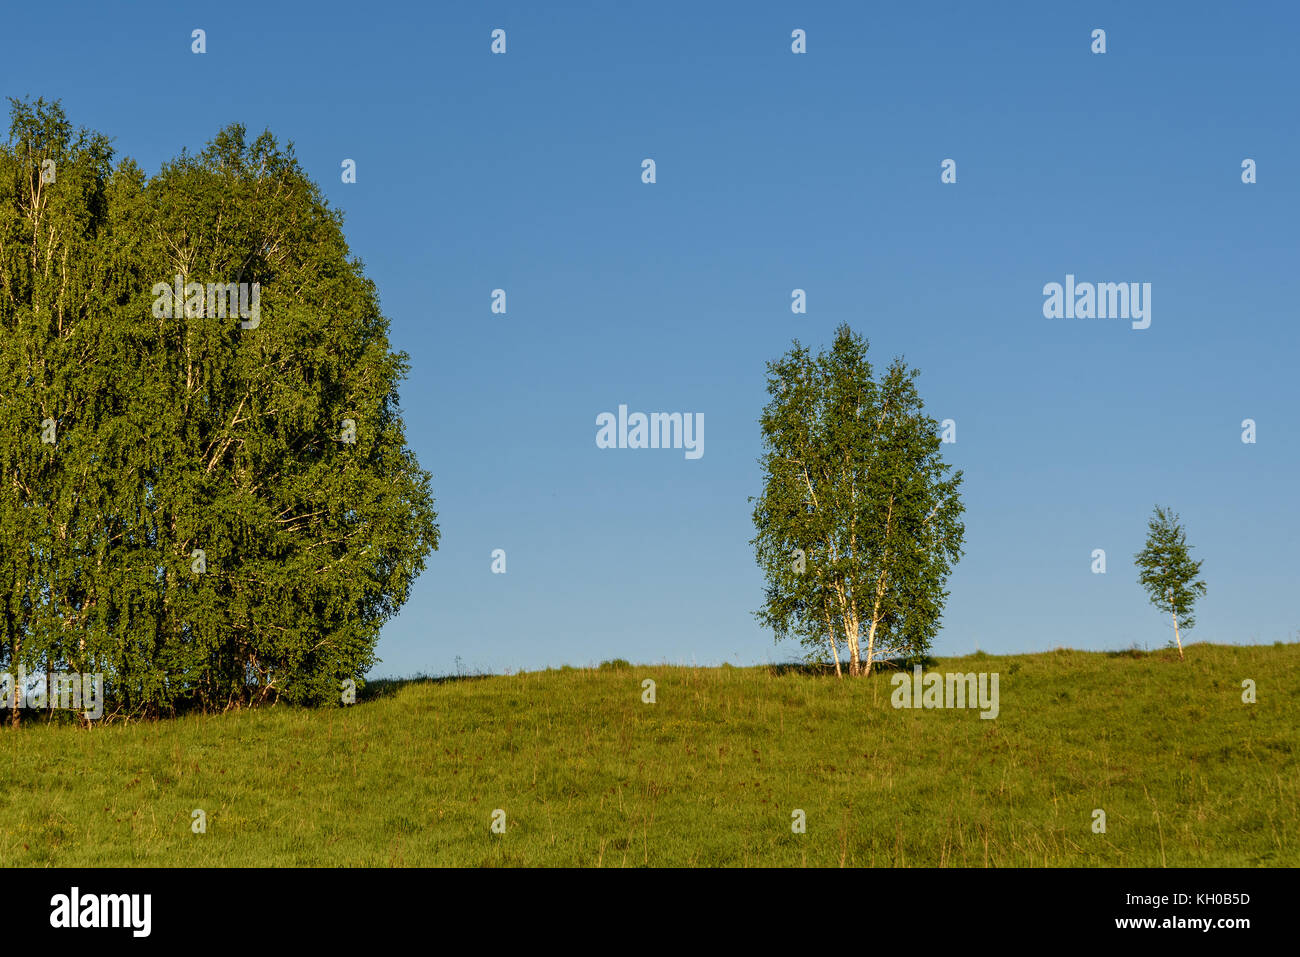 Beautiful natural background with long thin birch trees with green leaves in a birch grove on a background of blue sky Stock Photo